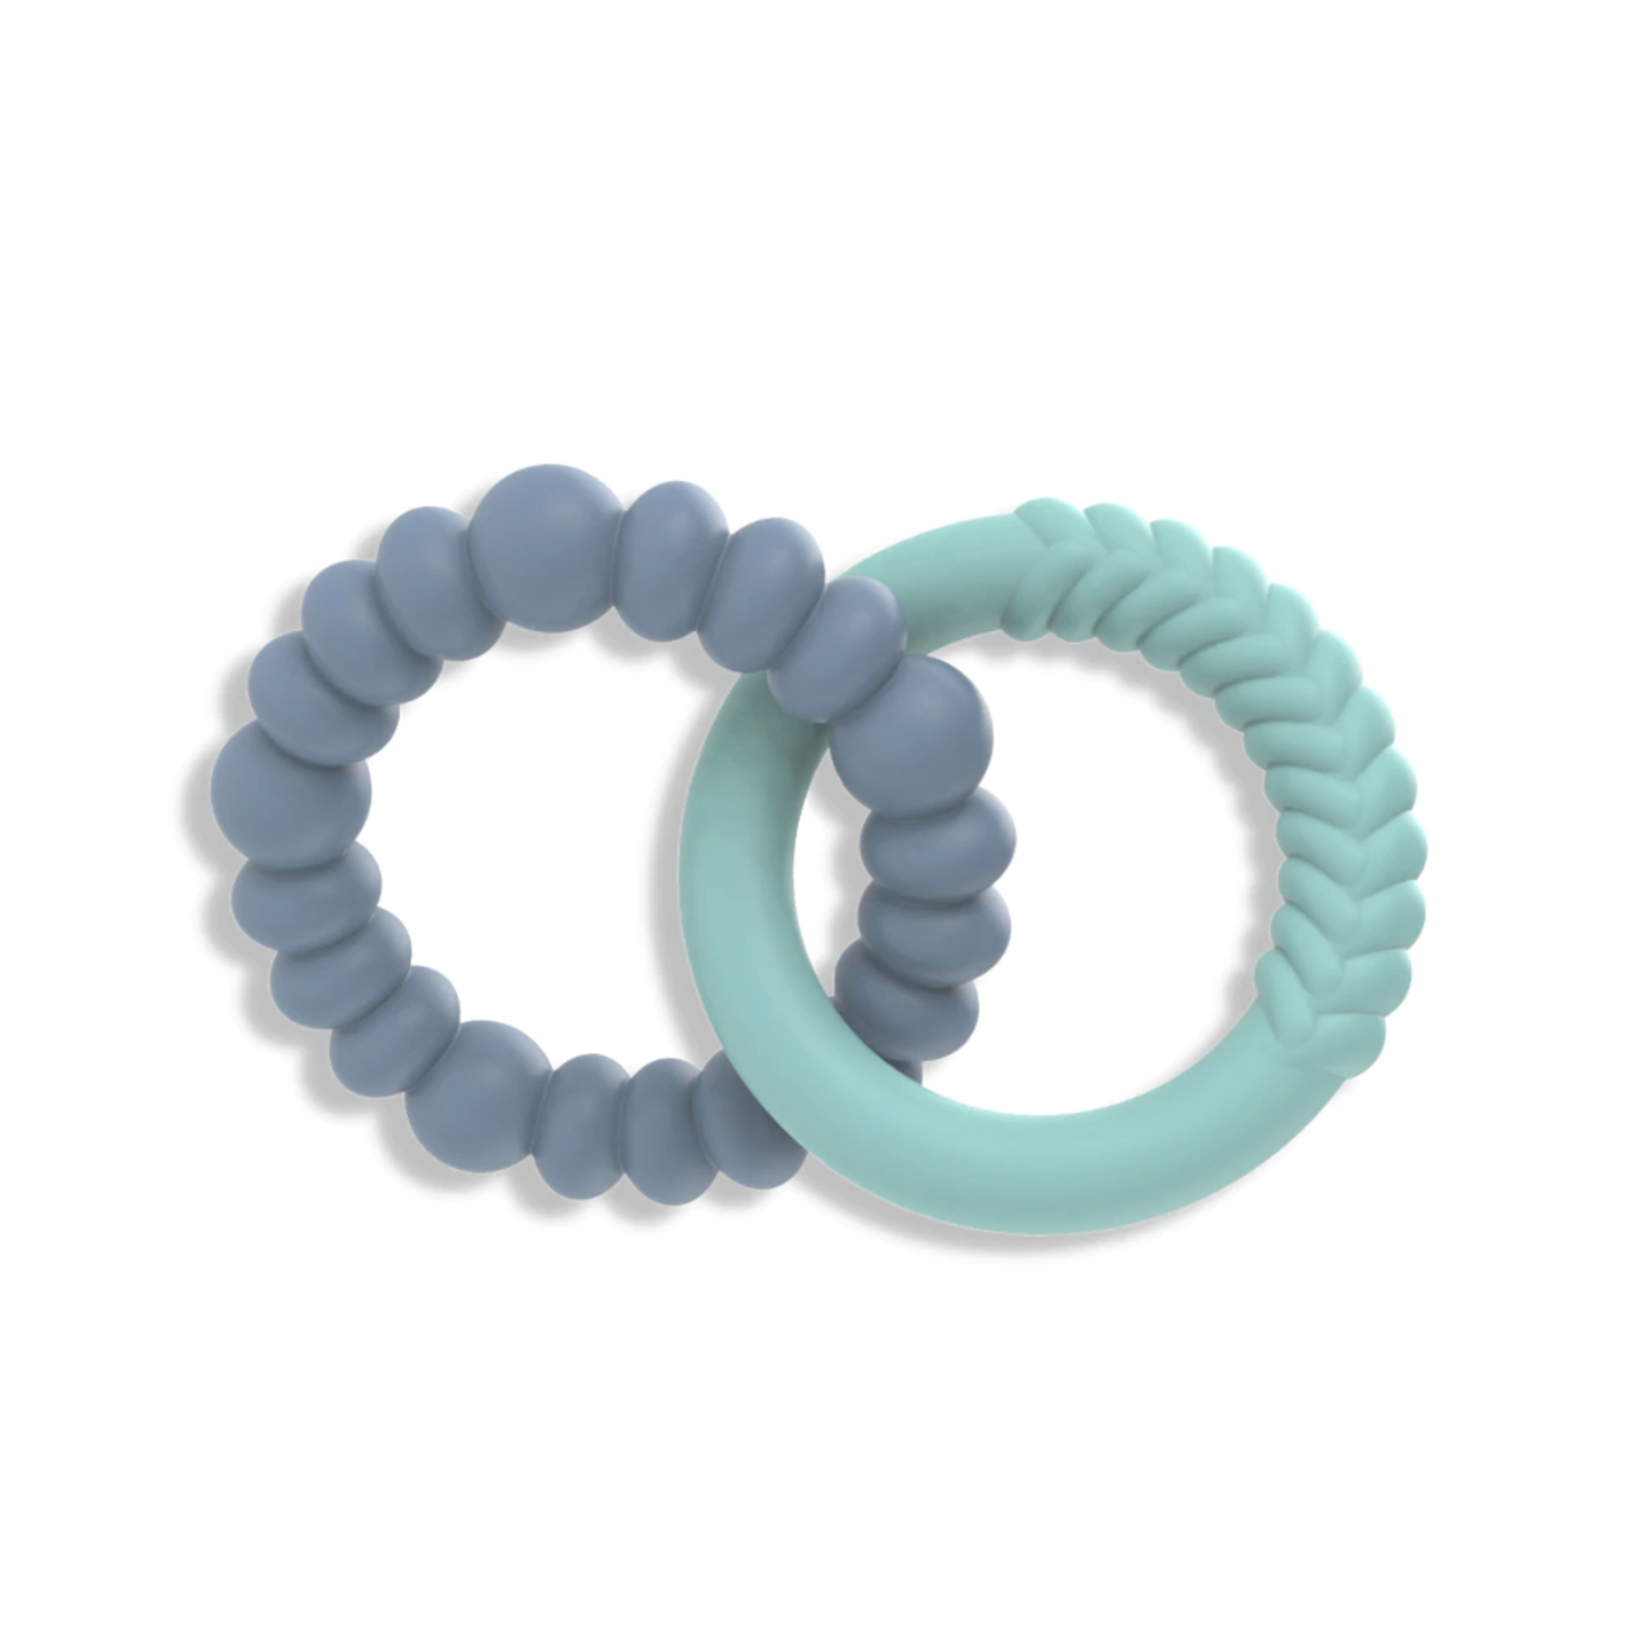 Jellystone Designs SUNSHINE TEETHER-SOFT MINT AND SOFT BLUE